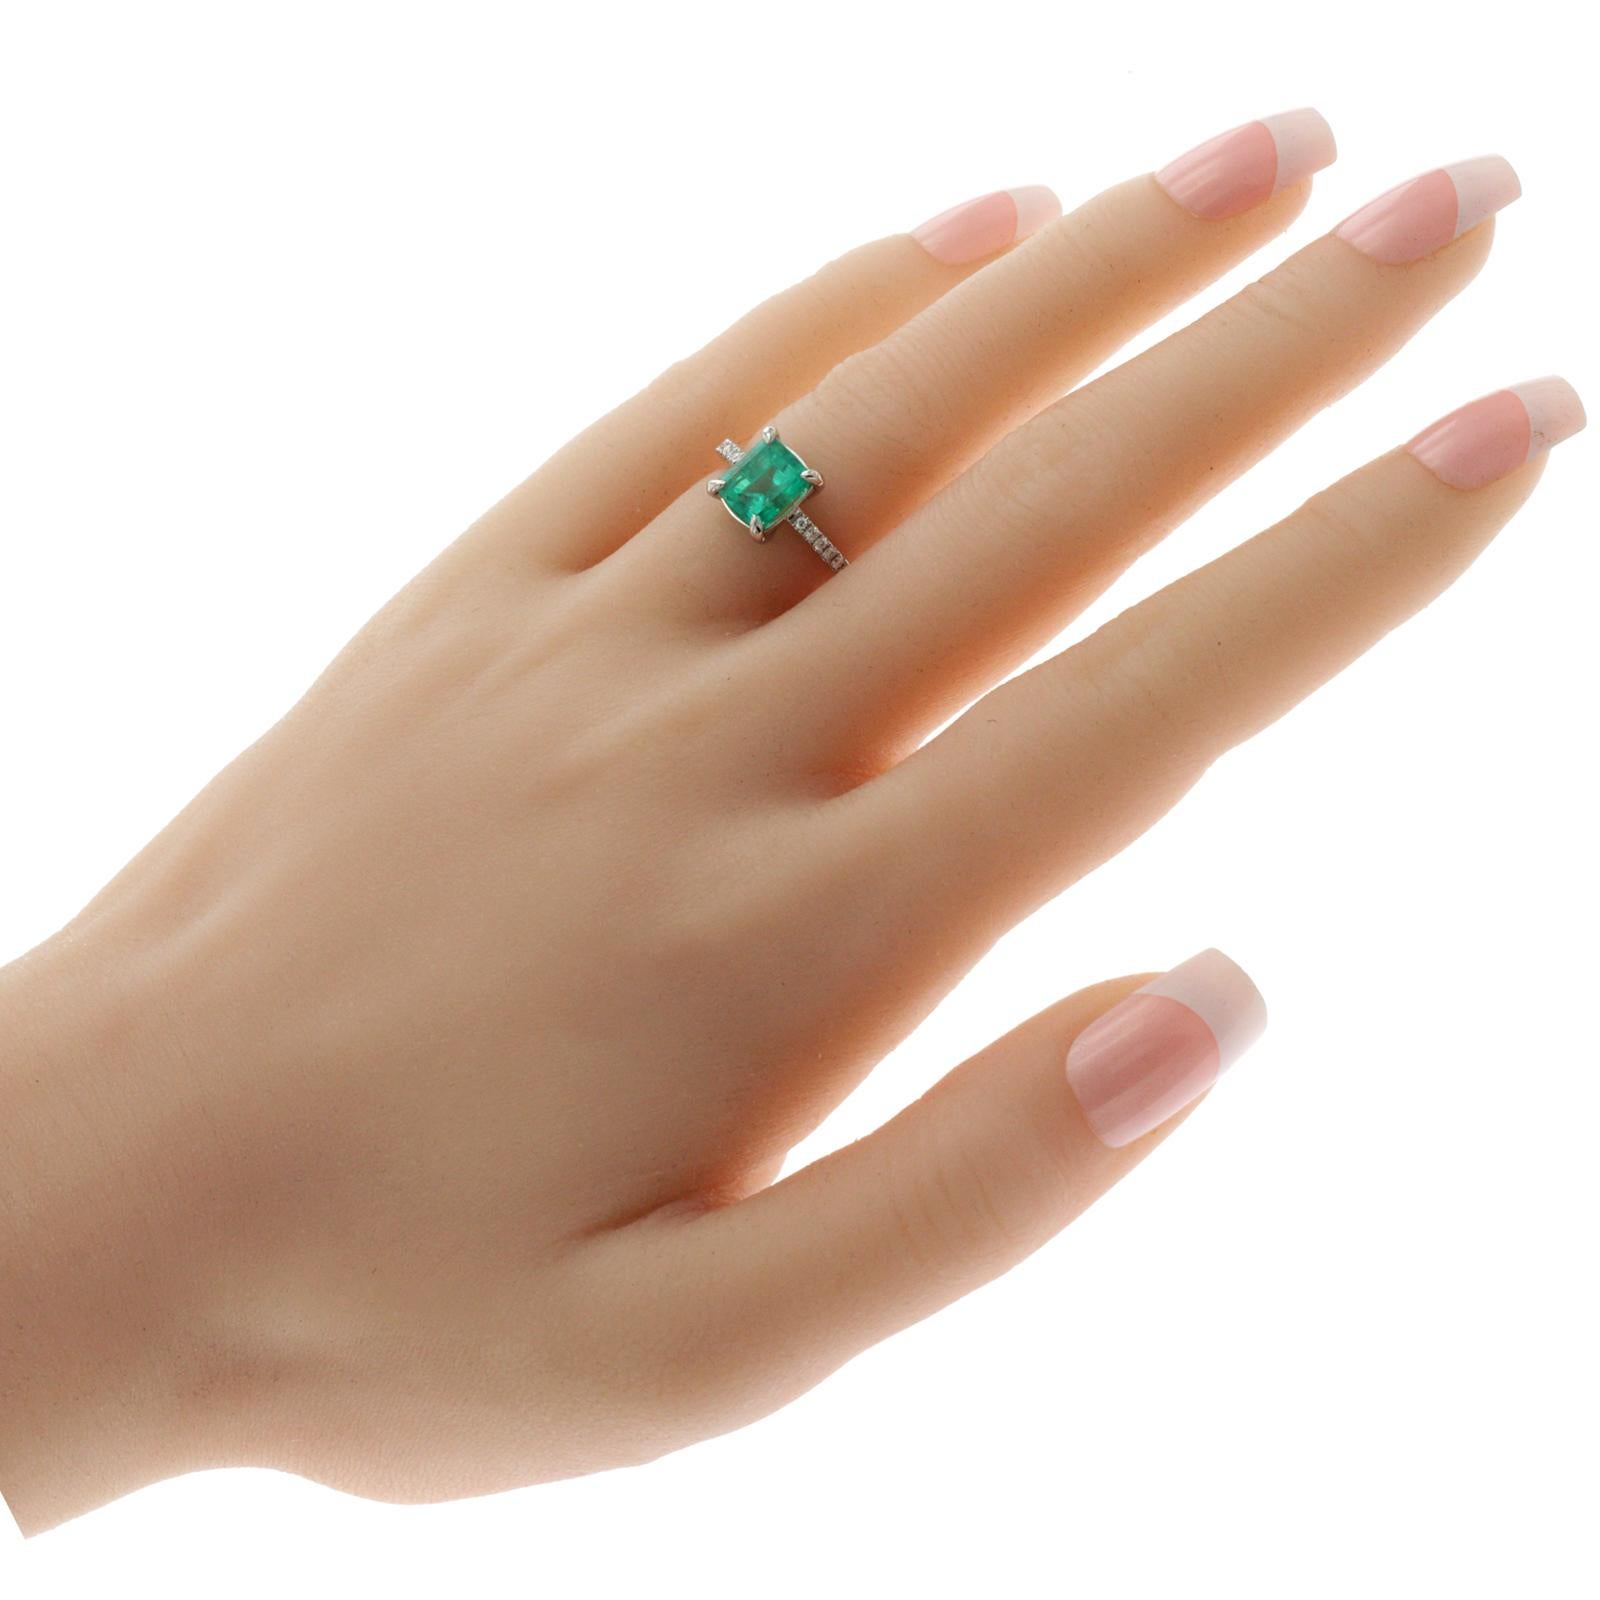 100% Authentic, 100% Customer Satisfaction

Top: 9 mm

Band Width: 2 mm

Metal: 14K White Gold 

Size: 6-8 ( Please message Us for your Size )

Hallmarks: 14K

Total Weight: 3.4 Grams

Stone Type:  2.22 CT Natural Emerald & 0.32 G VS2 CT